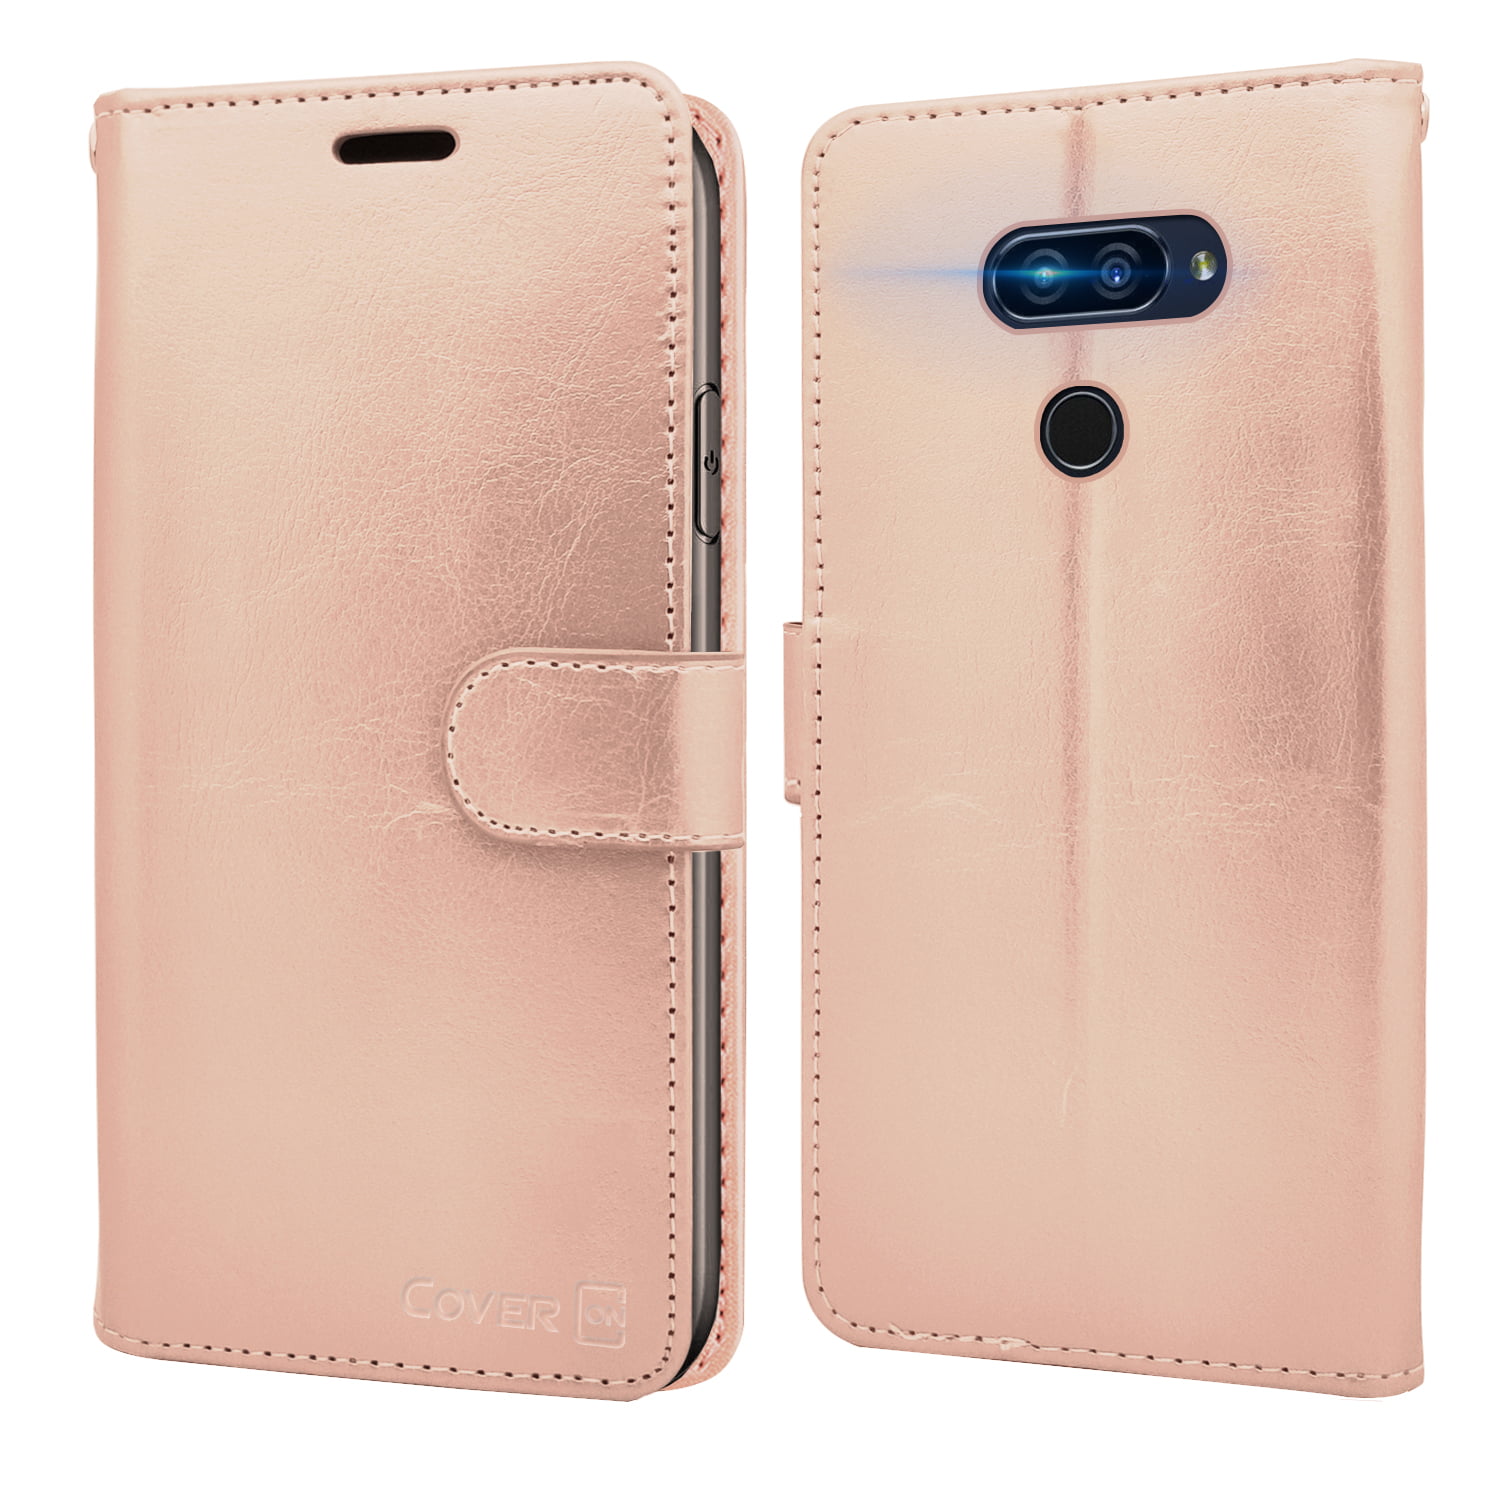 Magnetic Closure Full Protection Book Design Wallet Cover with 6.1 For For Ulefone Note 7P Phone Case Leather Case For Ulefone Note 7P 2019 and Kickstand Card Slots Pink